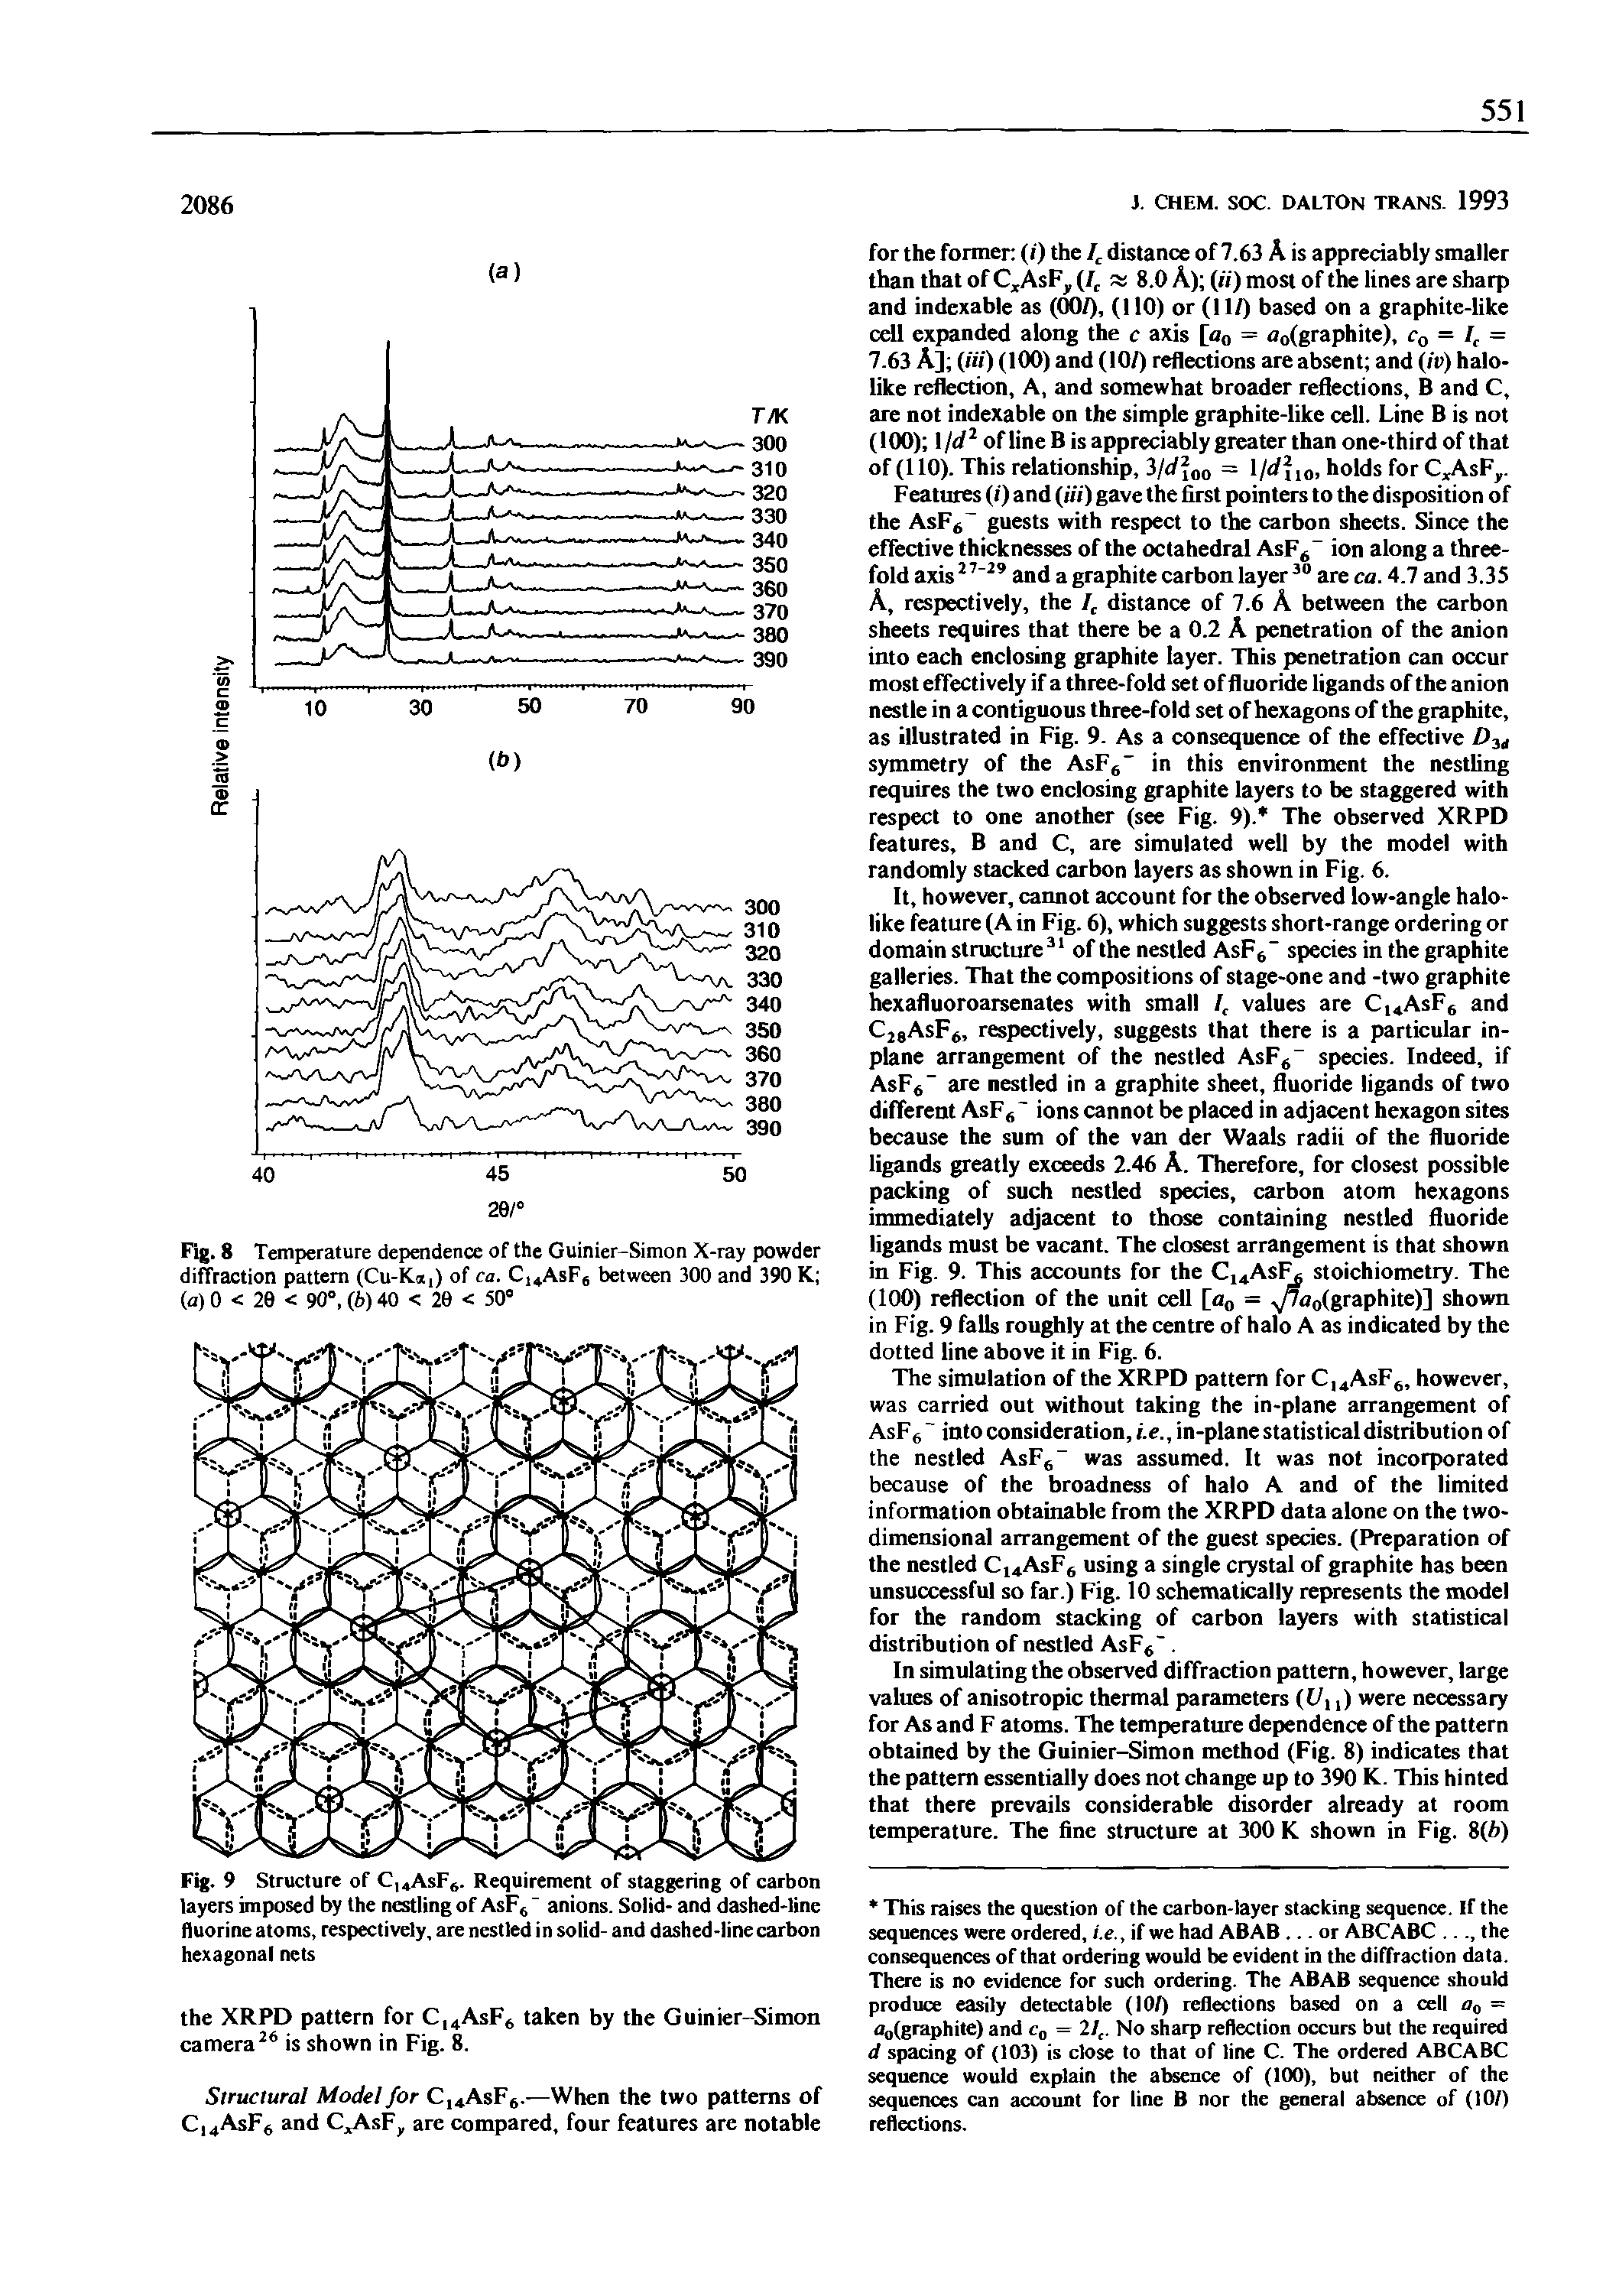 Fig. 9 Structure of C. AsPs. Requirement of staggering of carbon iayers imposed by the nestiing of AsF anions. Soiid- and dashed-line fluorine atoms, respectively, are nestled in solid- and dashed-line carbon hexagonal nets...